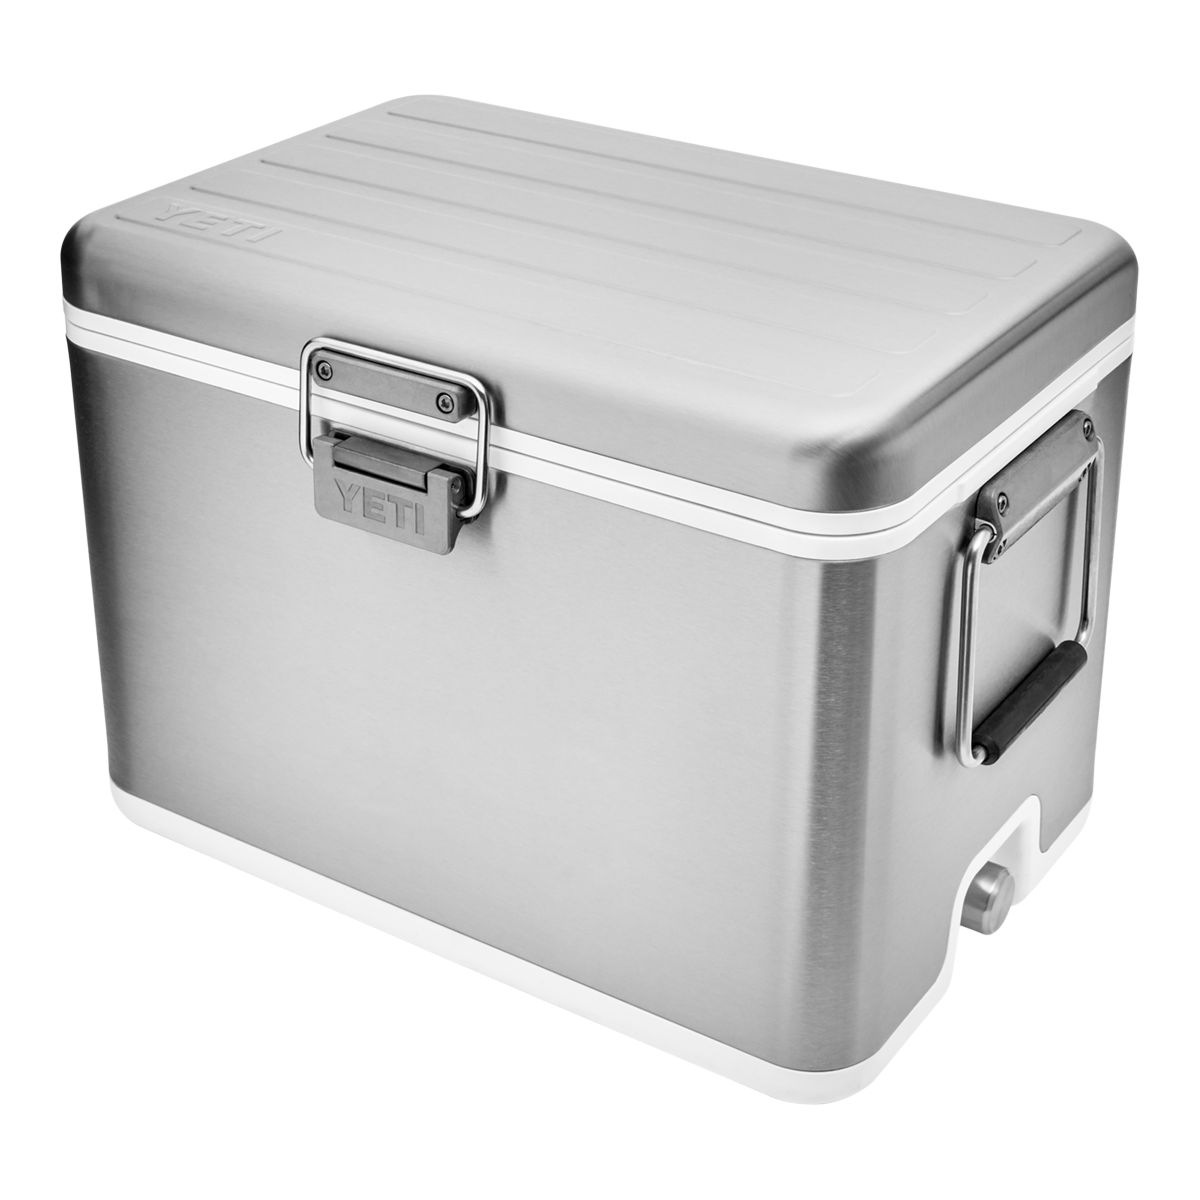 Image of Yeti V Series 55L Stainless Steel Hard Cooler